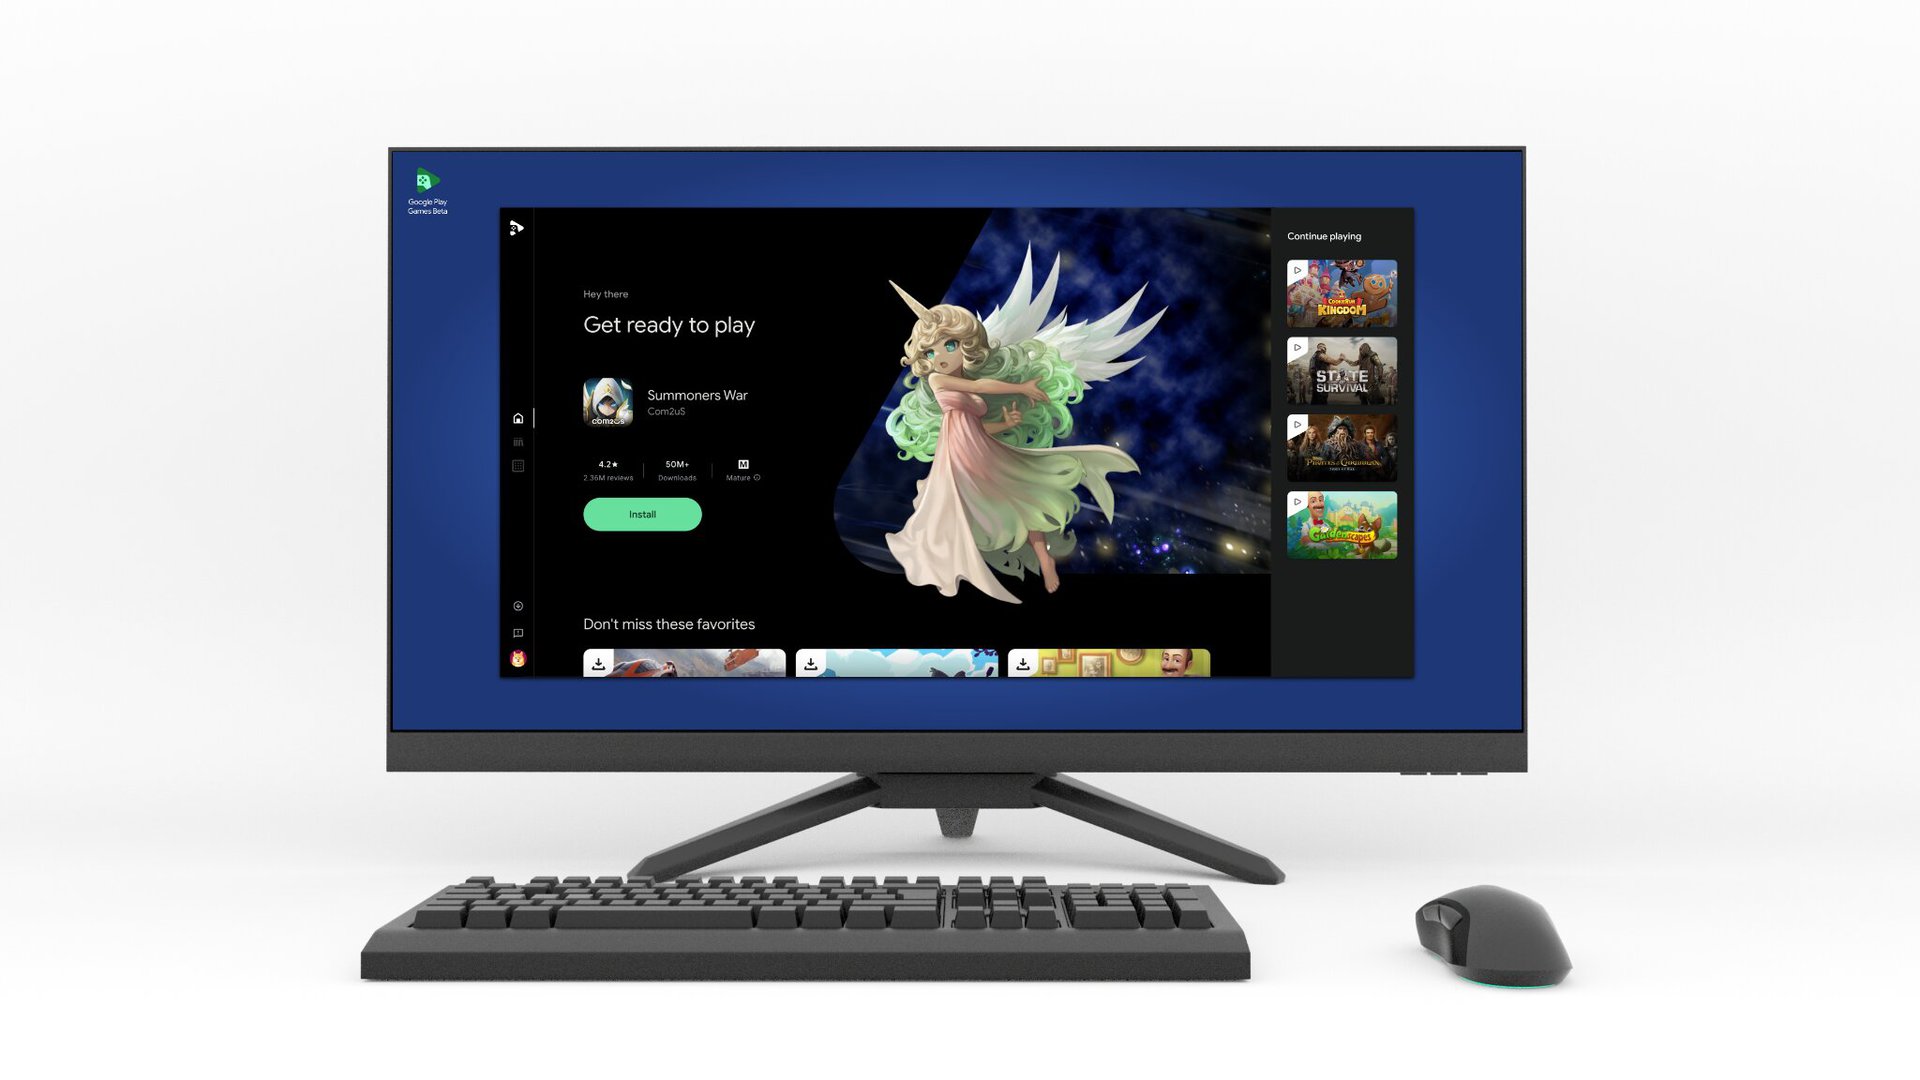 Google Play Games on PC adds new games, keyboard remapping, and 60 new regions